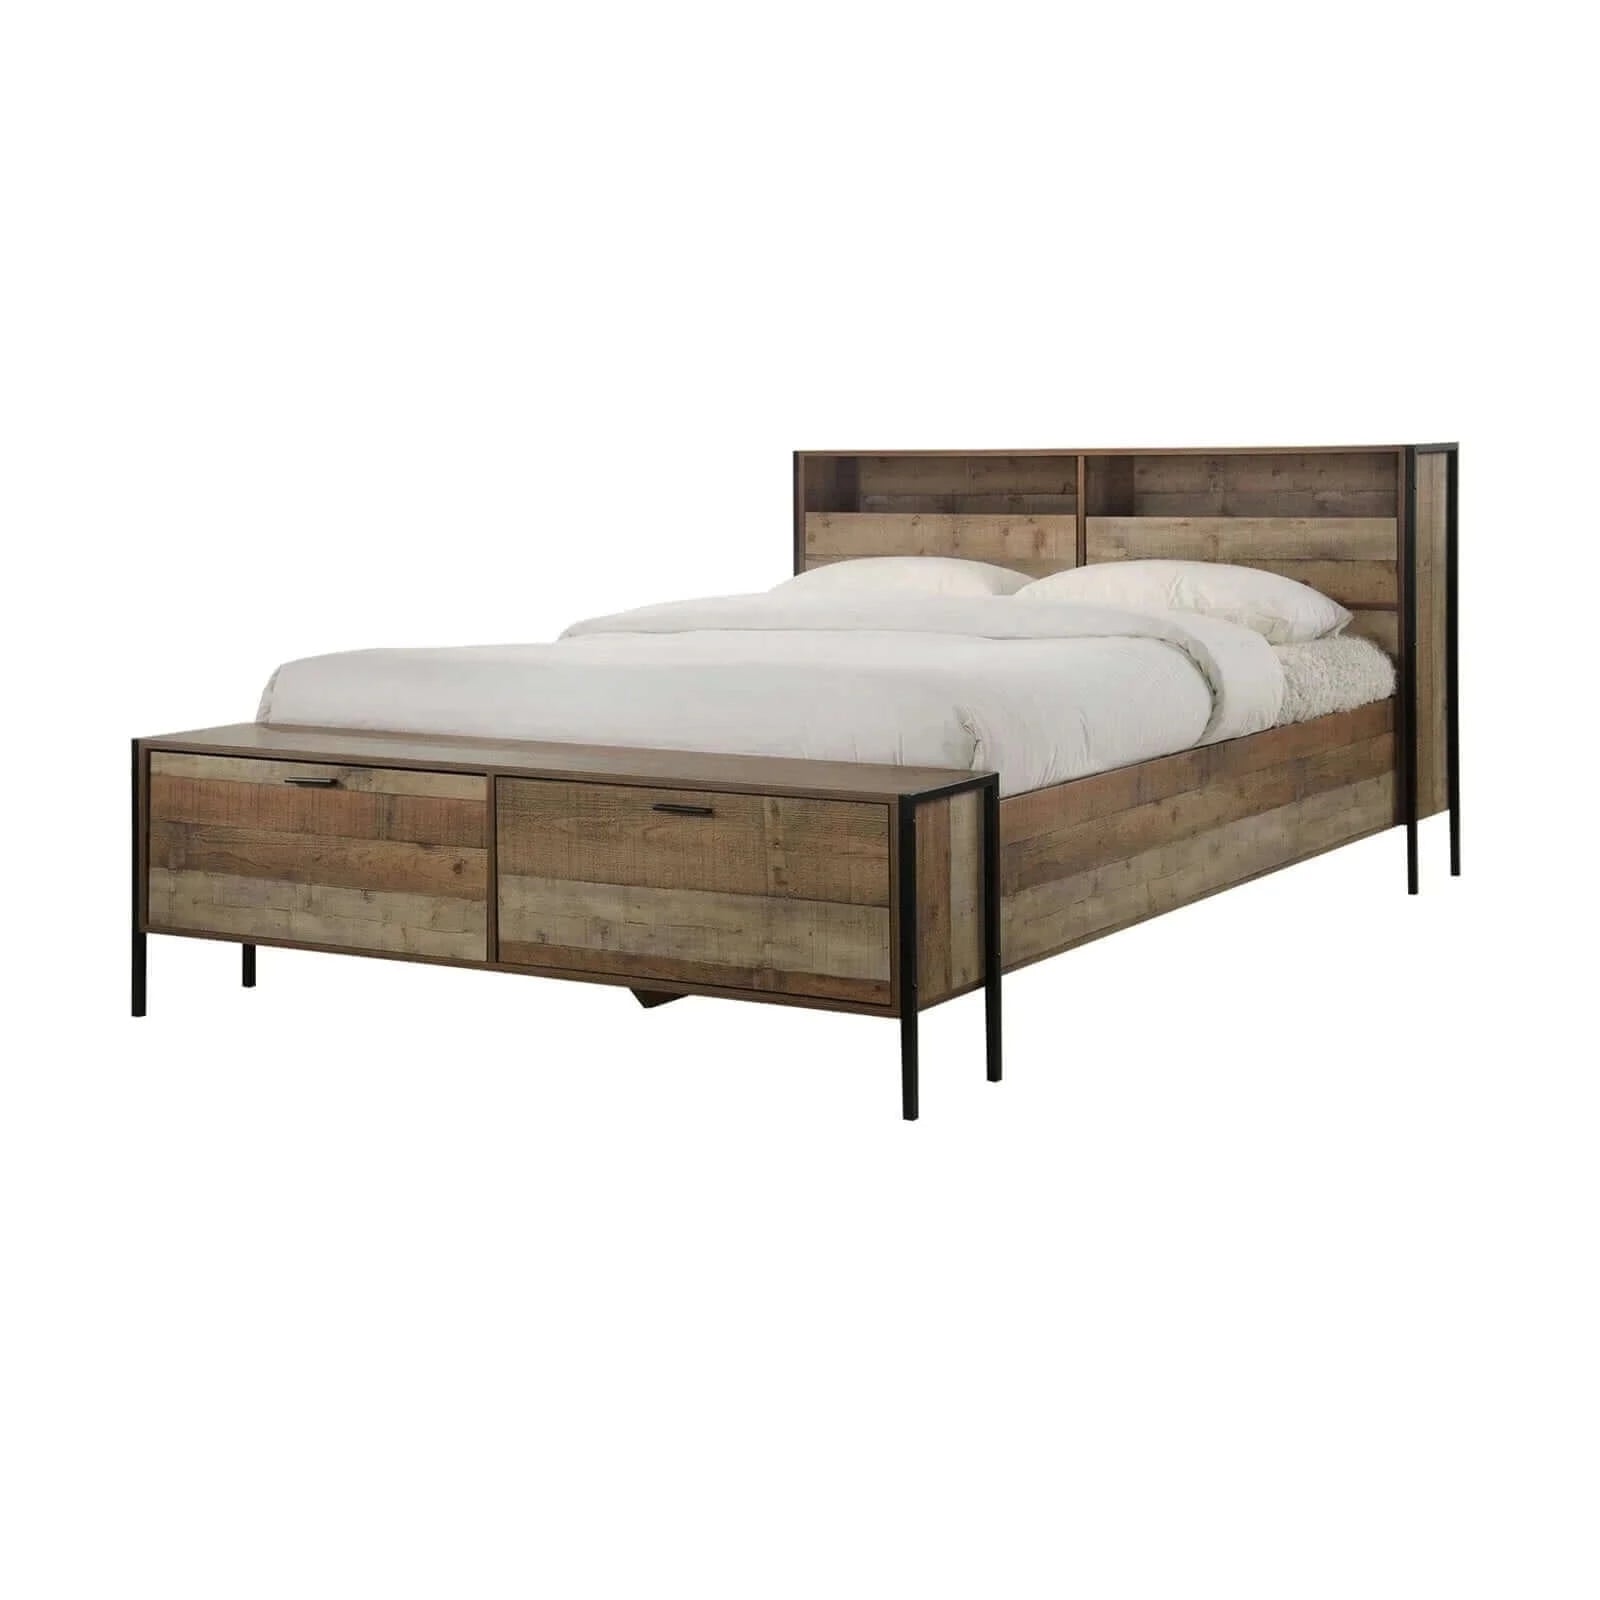 Buy queen size storage bed farme in oak colour with particle board contraction and metal legs - upinteriors-Upinteriors